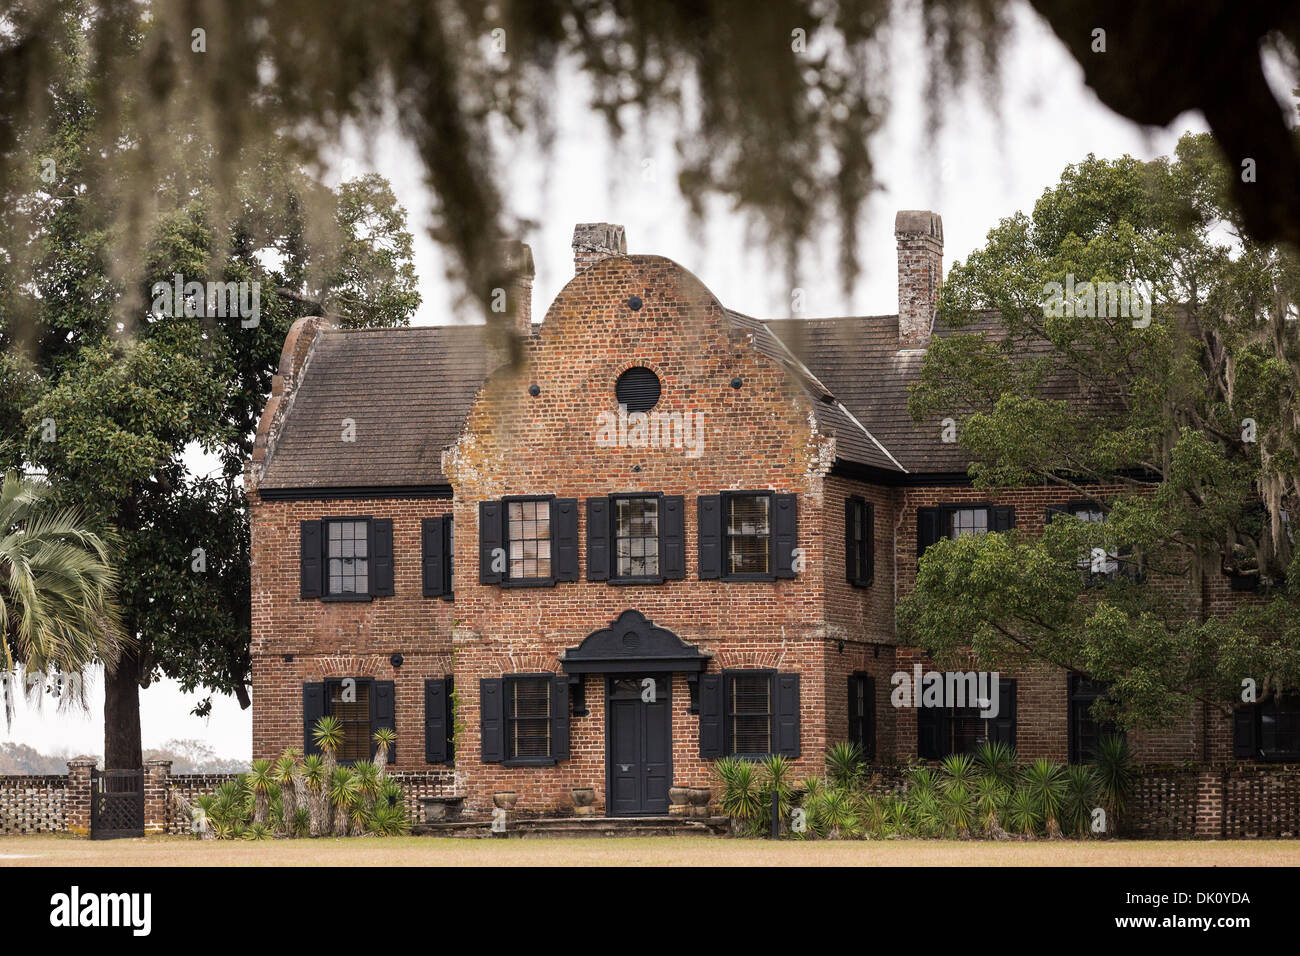 Manor house at Middleton Place Plantation in Charleston, SC. Stock Photo